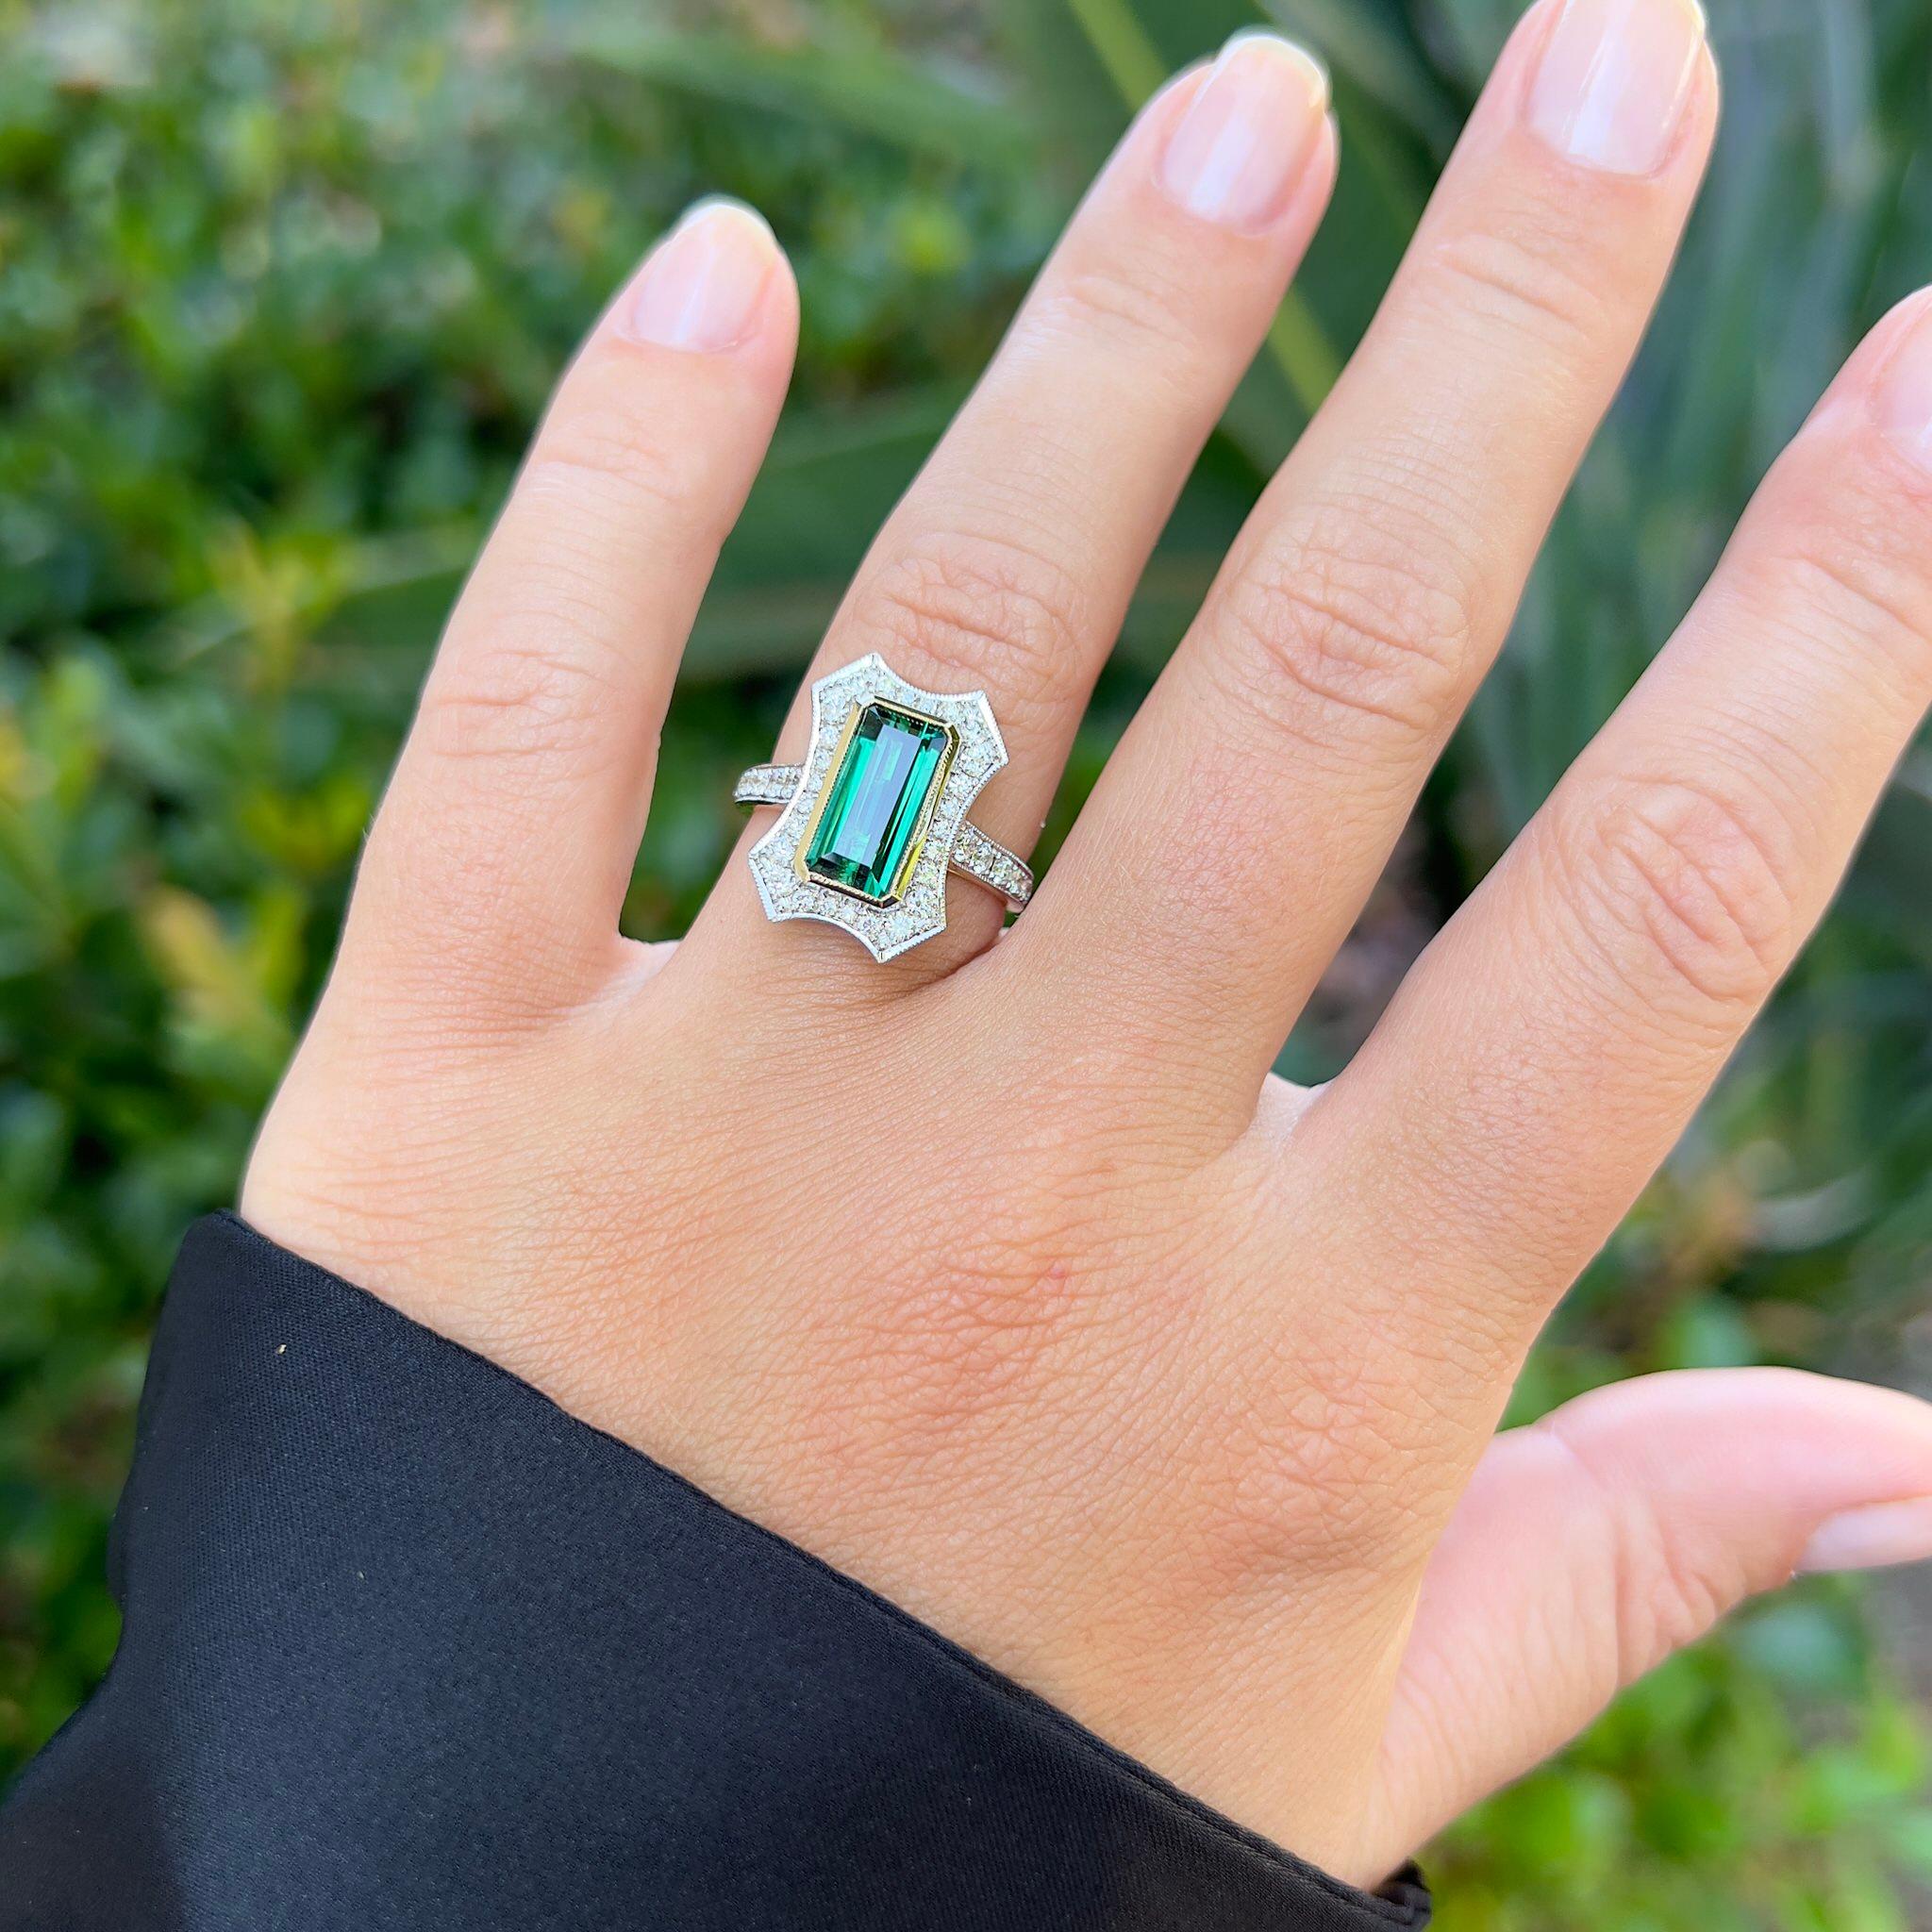 Exceptional Natural Green Tourmaline Ring Diamond Setting 3.42 Carats 14K Gold In Excellent Condition For Sale In Laguna Niguel, CA